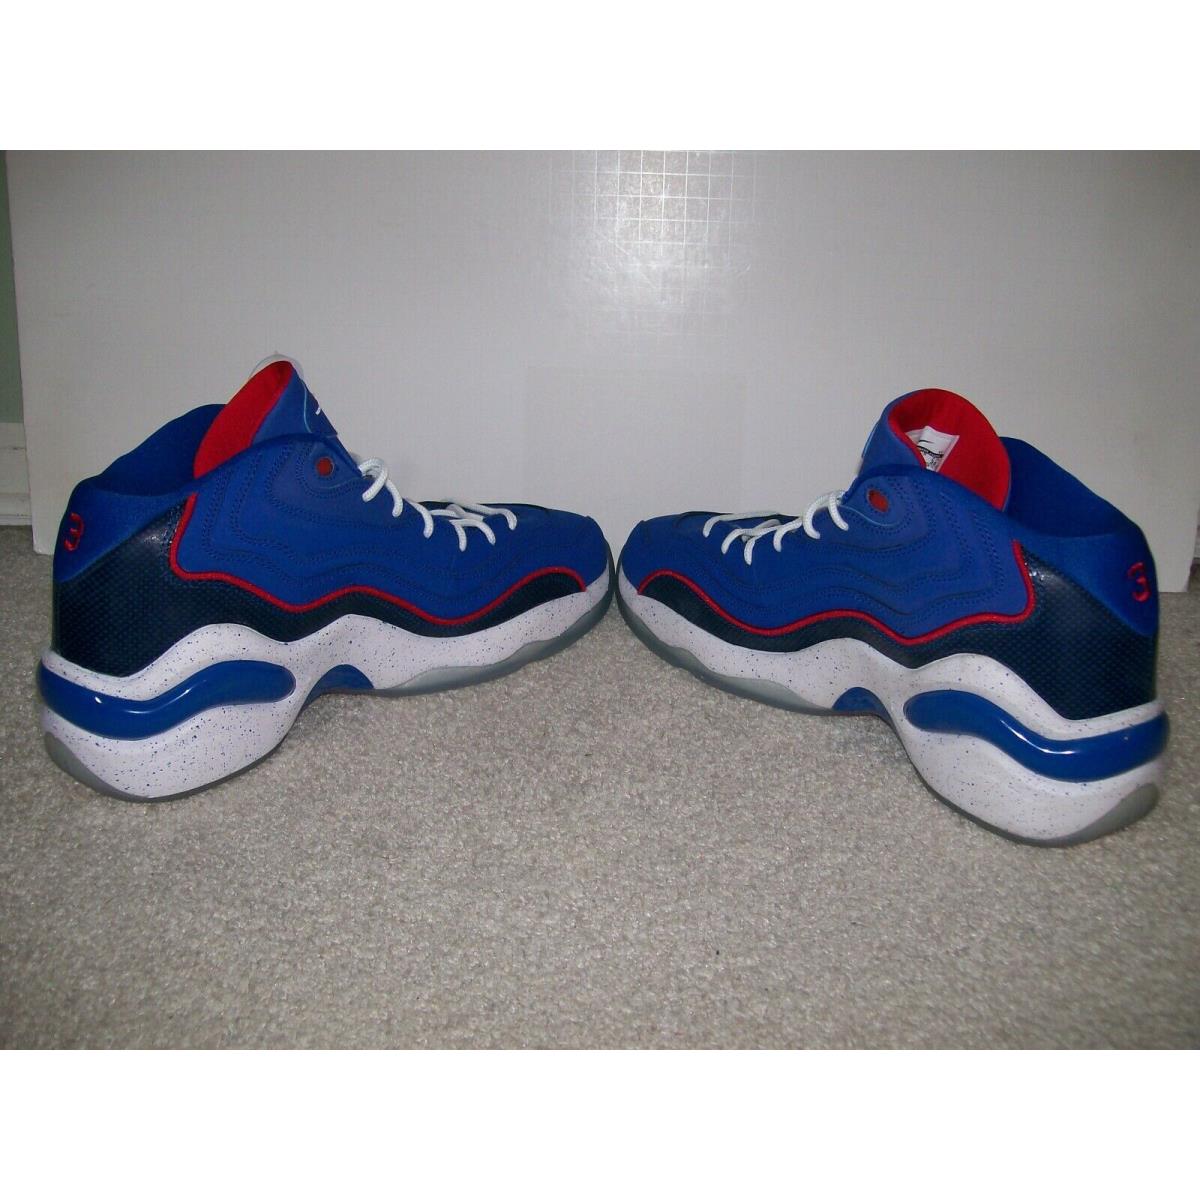 Nike shoes Air Zoom Flight - Blue Red White 4